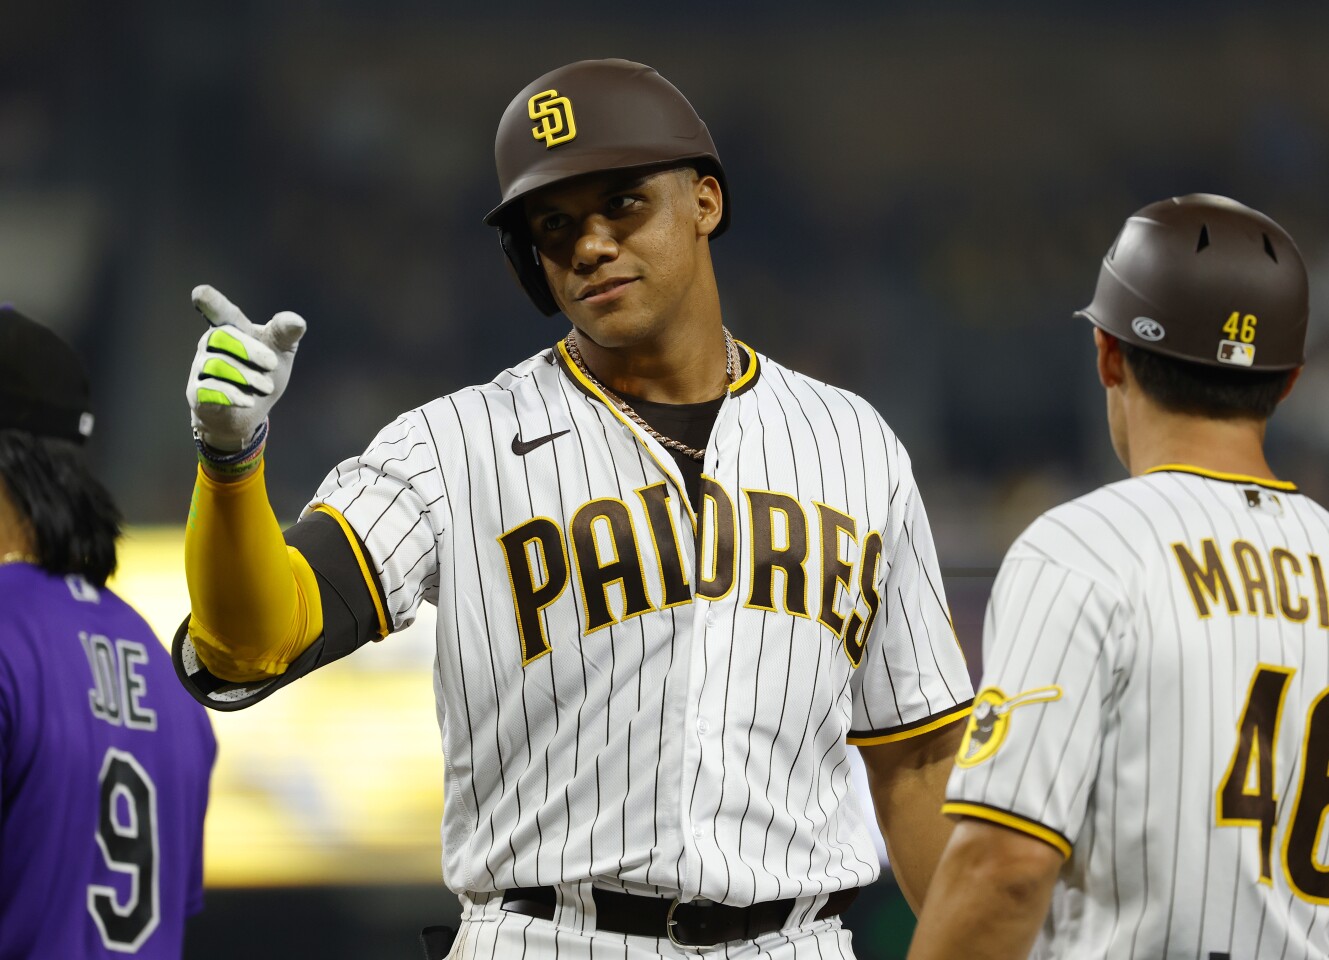 SAN DIEGO, CA - AUGUST 3: San Diego Padres' Juan Soto gestures after hitting a single in the eighth inning against the Colorado Rockies at Petco Park on Wednesday, August 3, 2022 in San Diego, CA. (K.C. Alfred / The San Diego Union-Tribune)